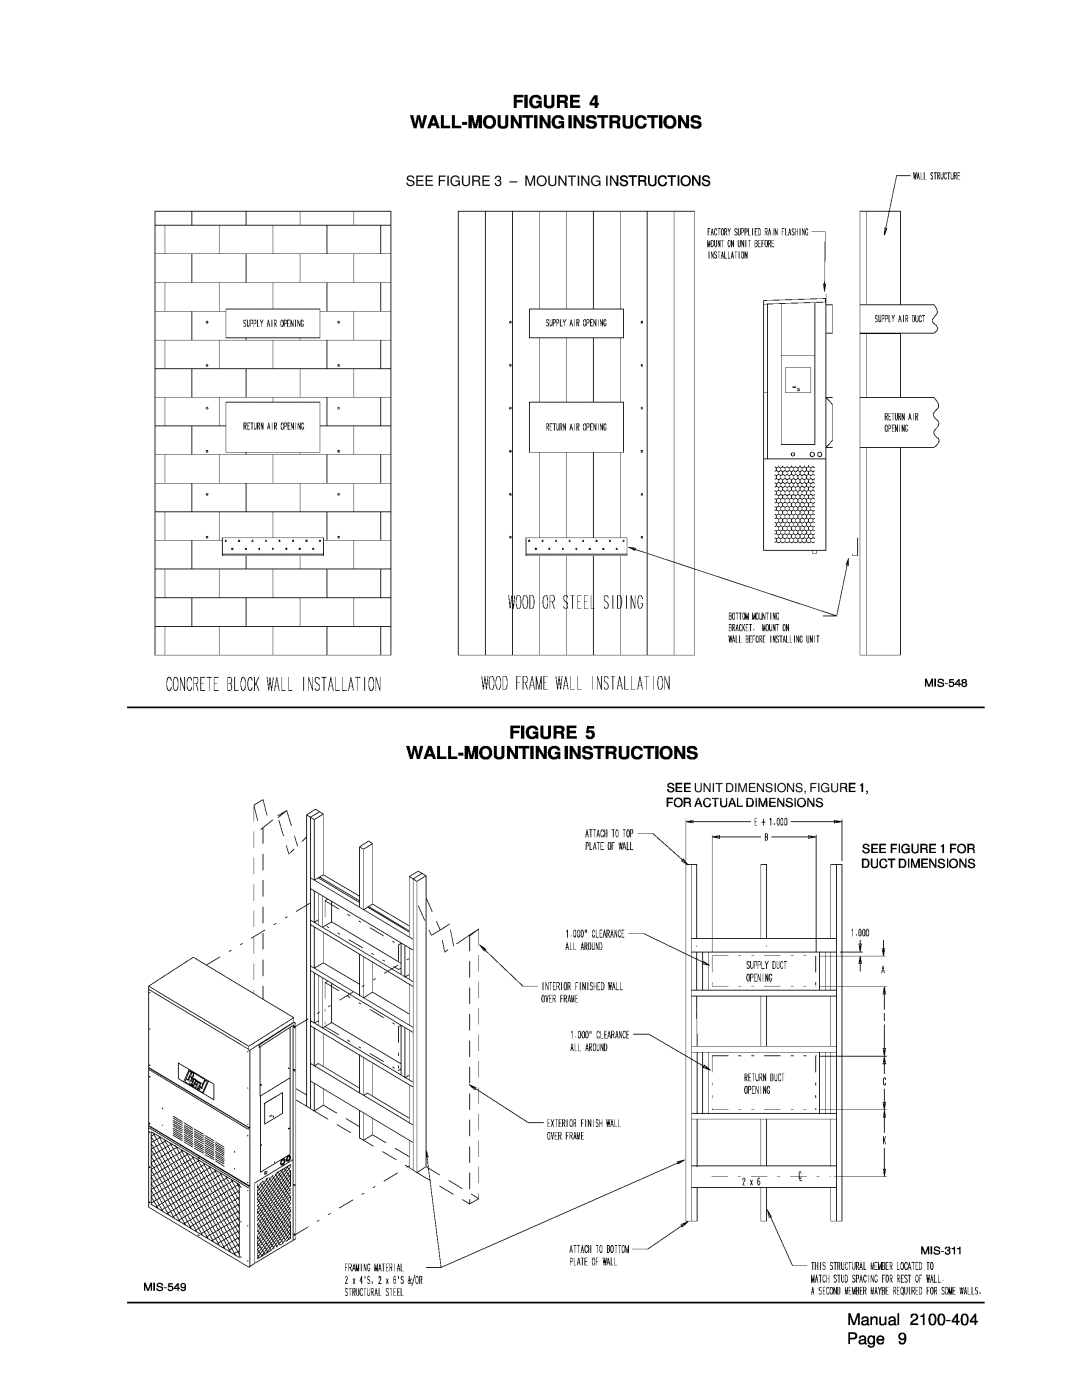 Bard MIS-656 Figure Wall-Mountinginstructions, Manual 2100-404Page, See Unit Dimensions, Figure For Actual Dimensions 